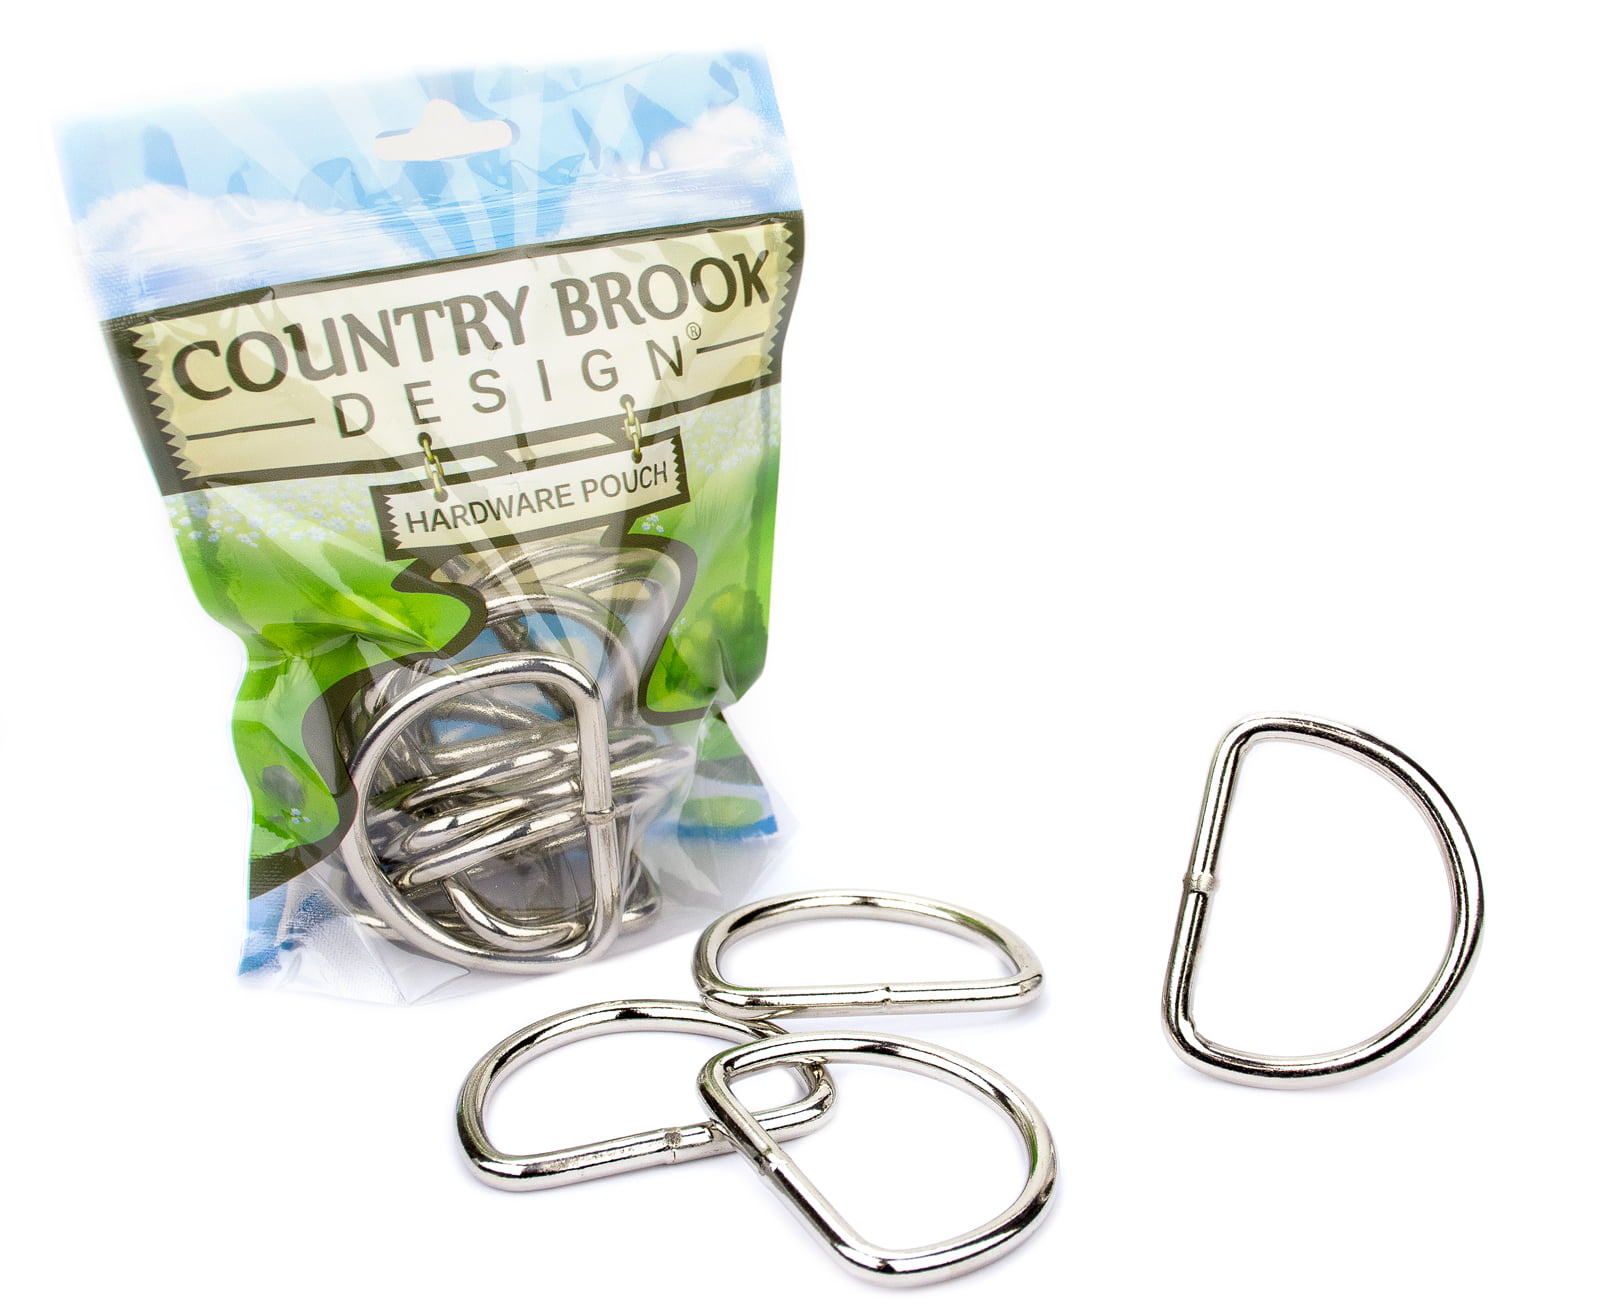 Country Brook Design 1 Inch Heavy Welded D-Rings 50 